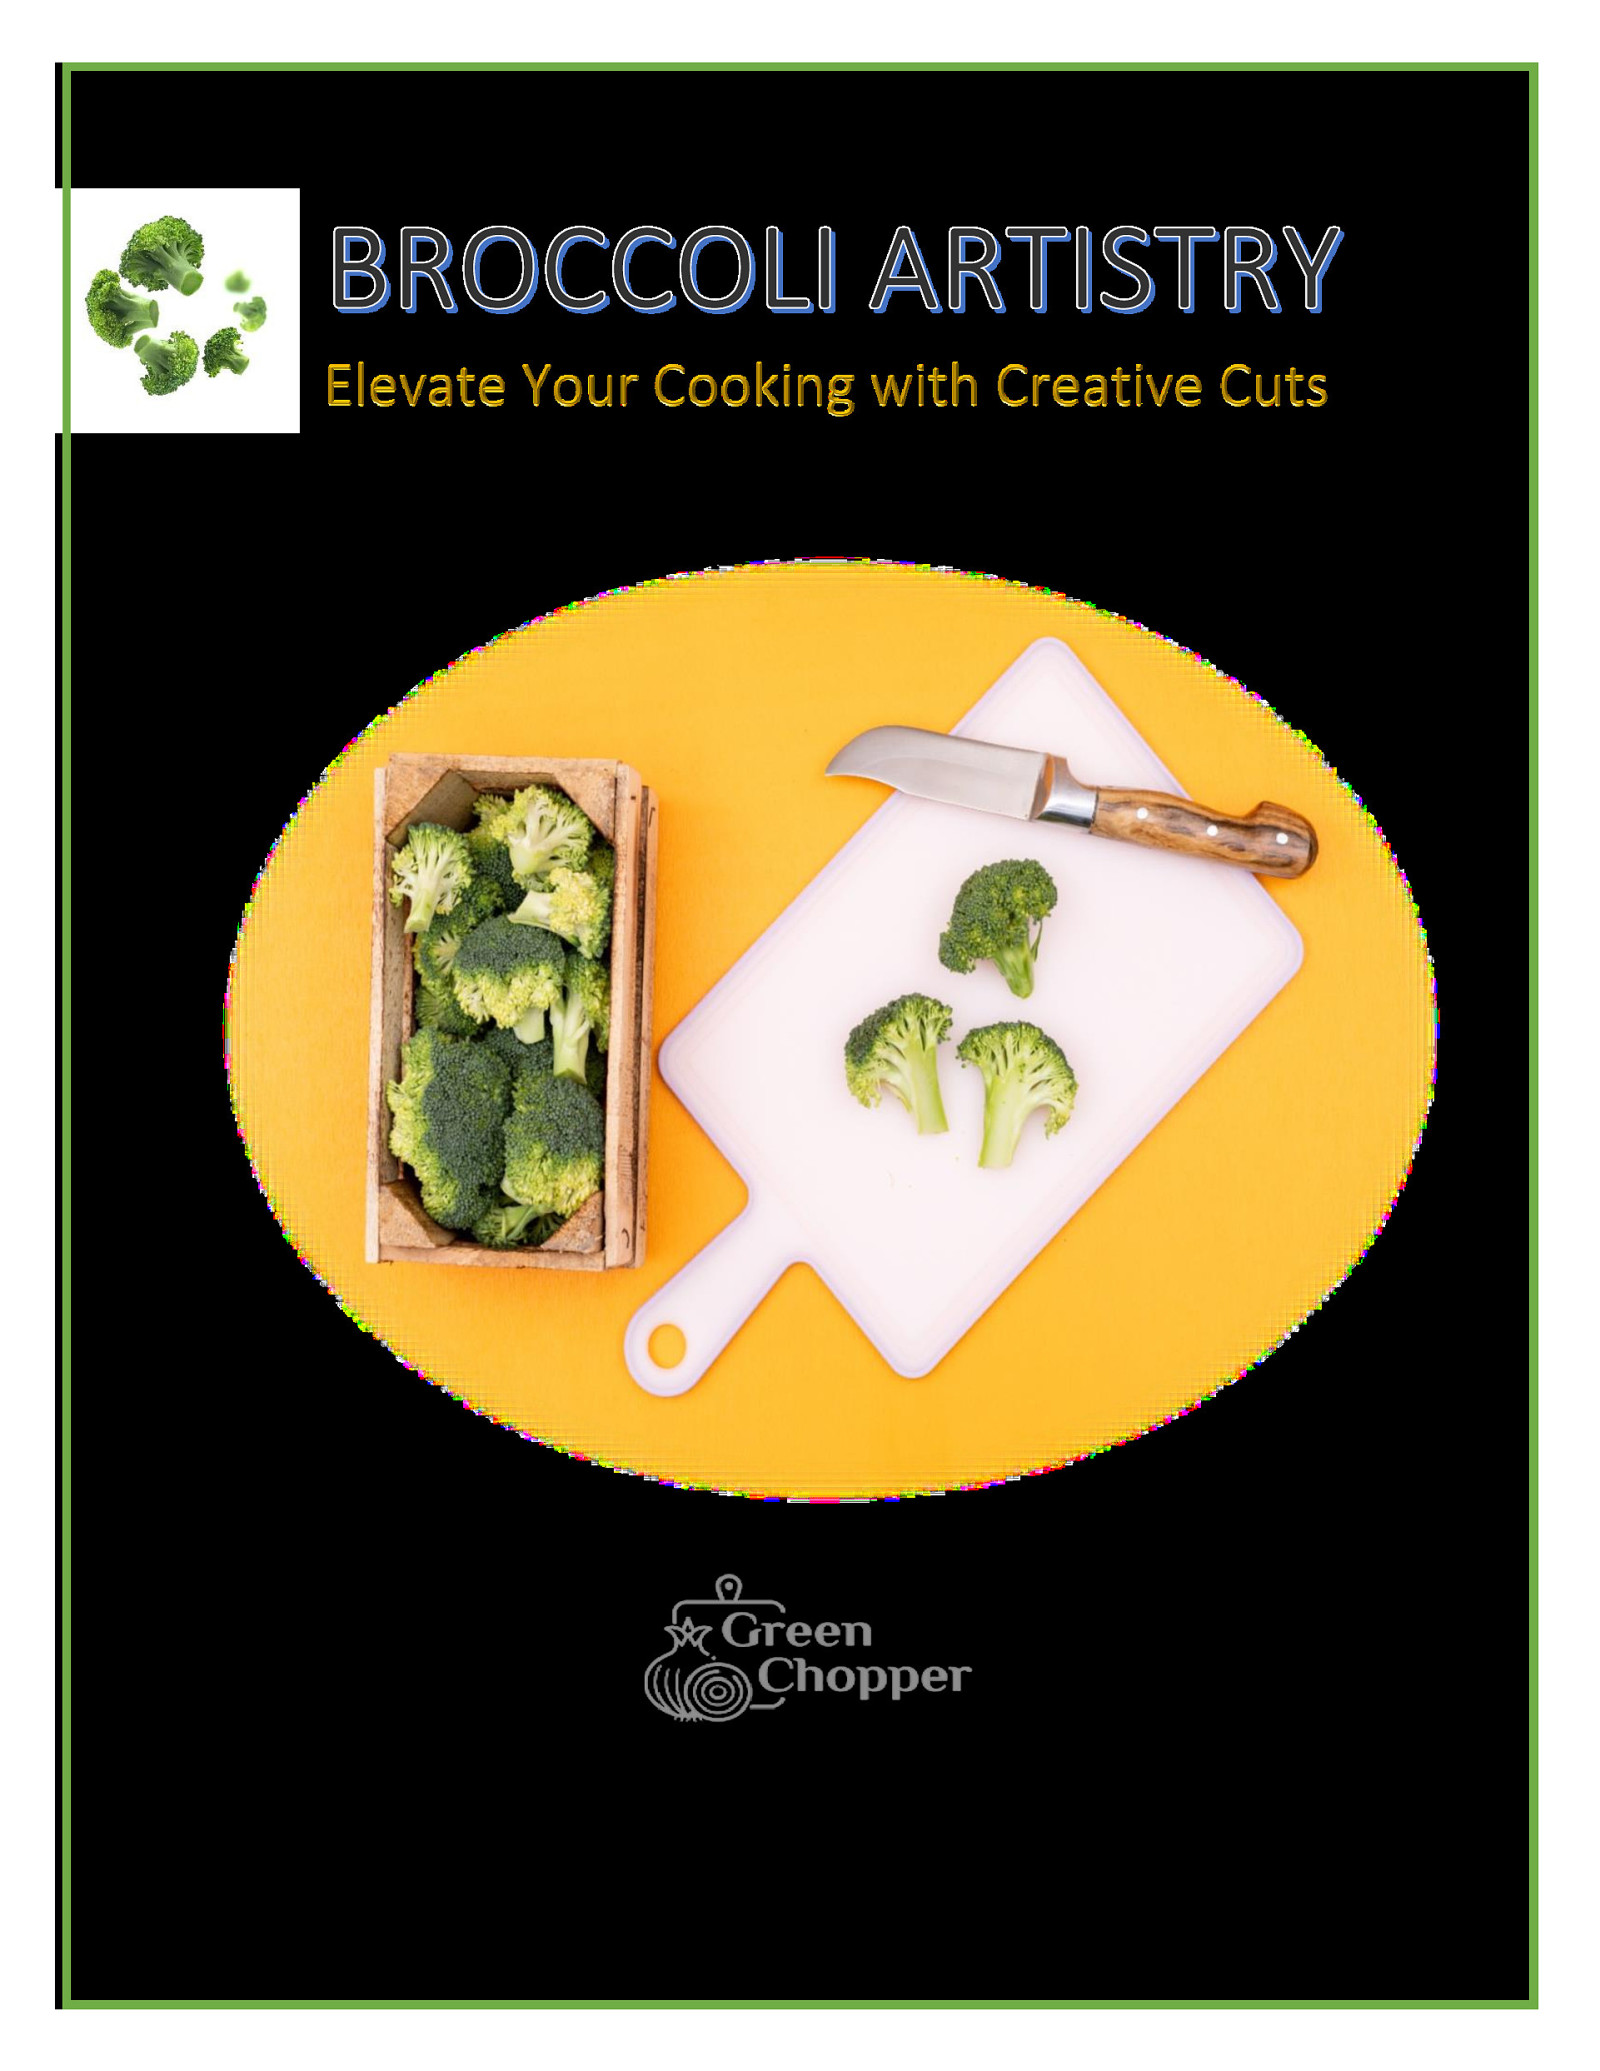  BROCCOLI ARTISTRY Elevate Your Cooking with Creative Cuts